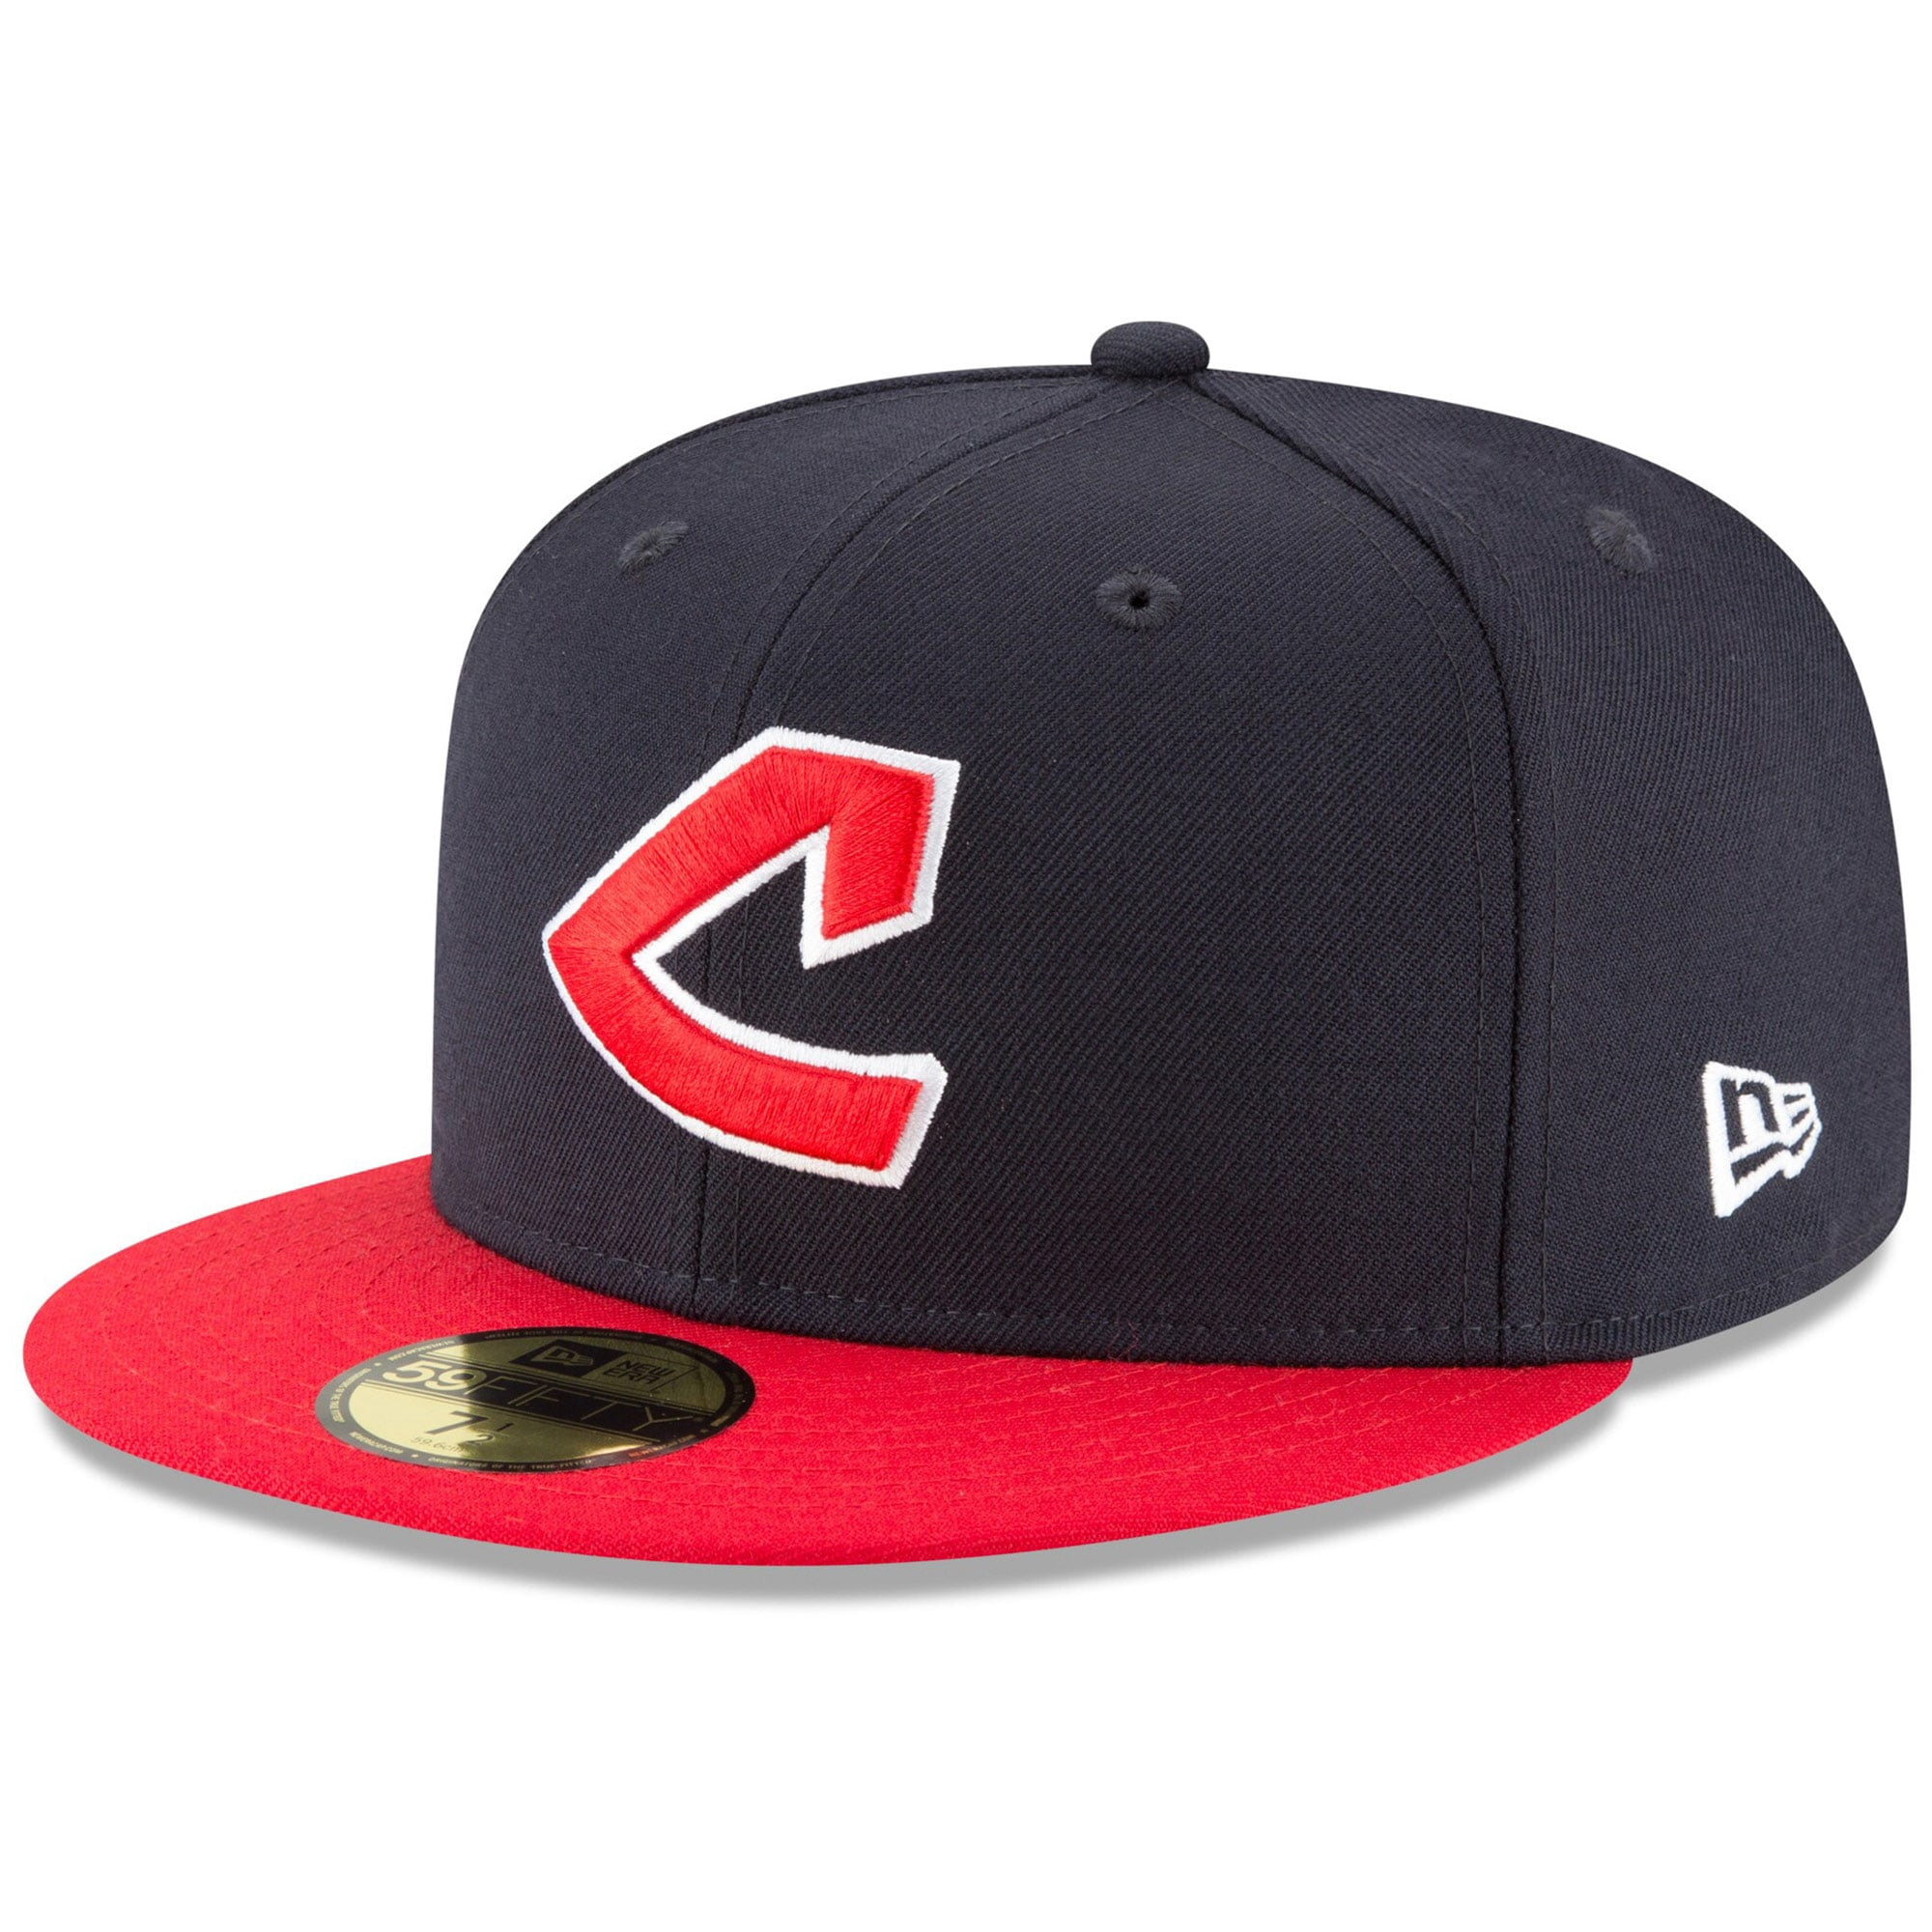 cooperstown collection hat